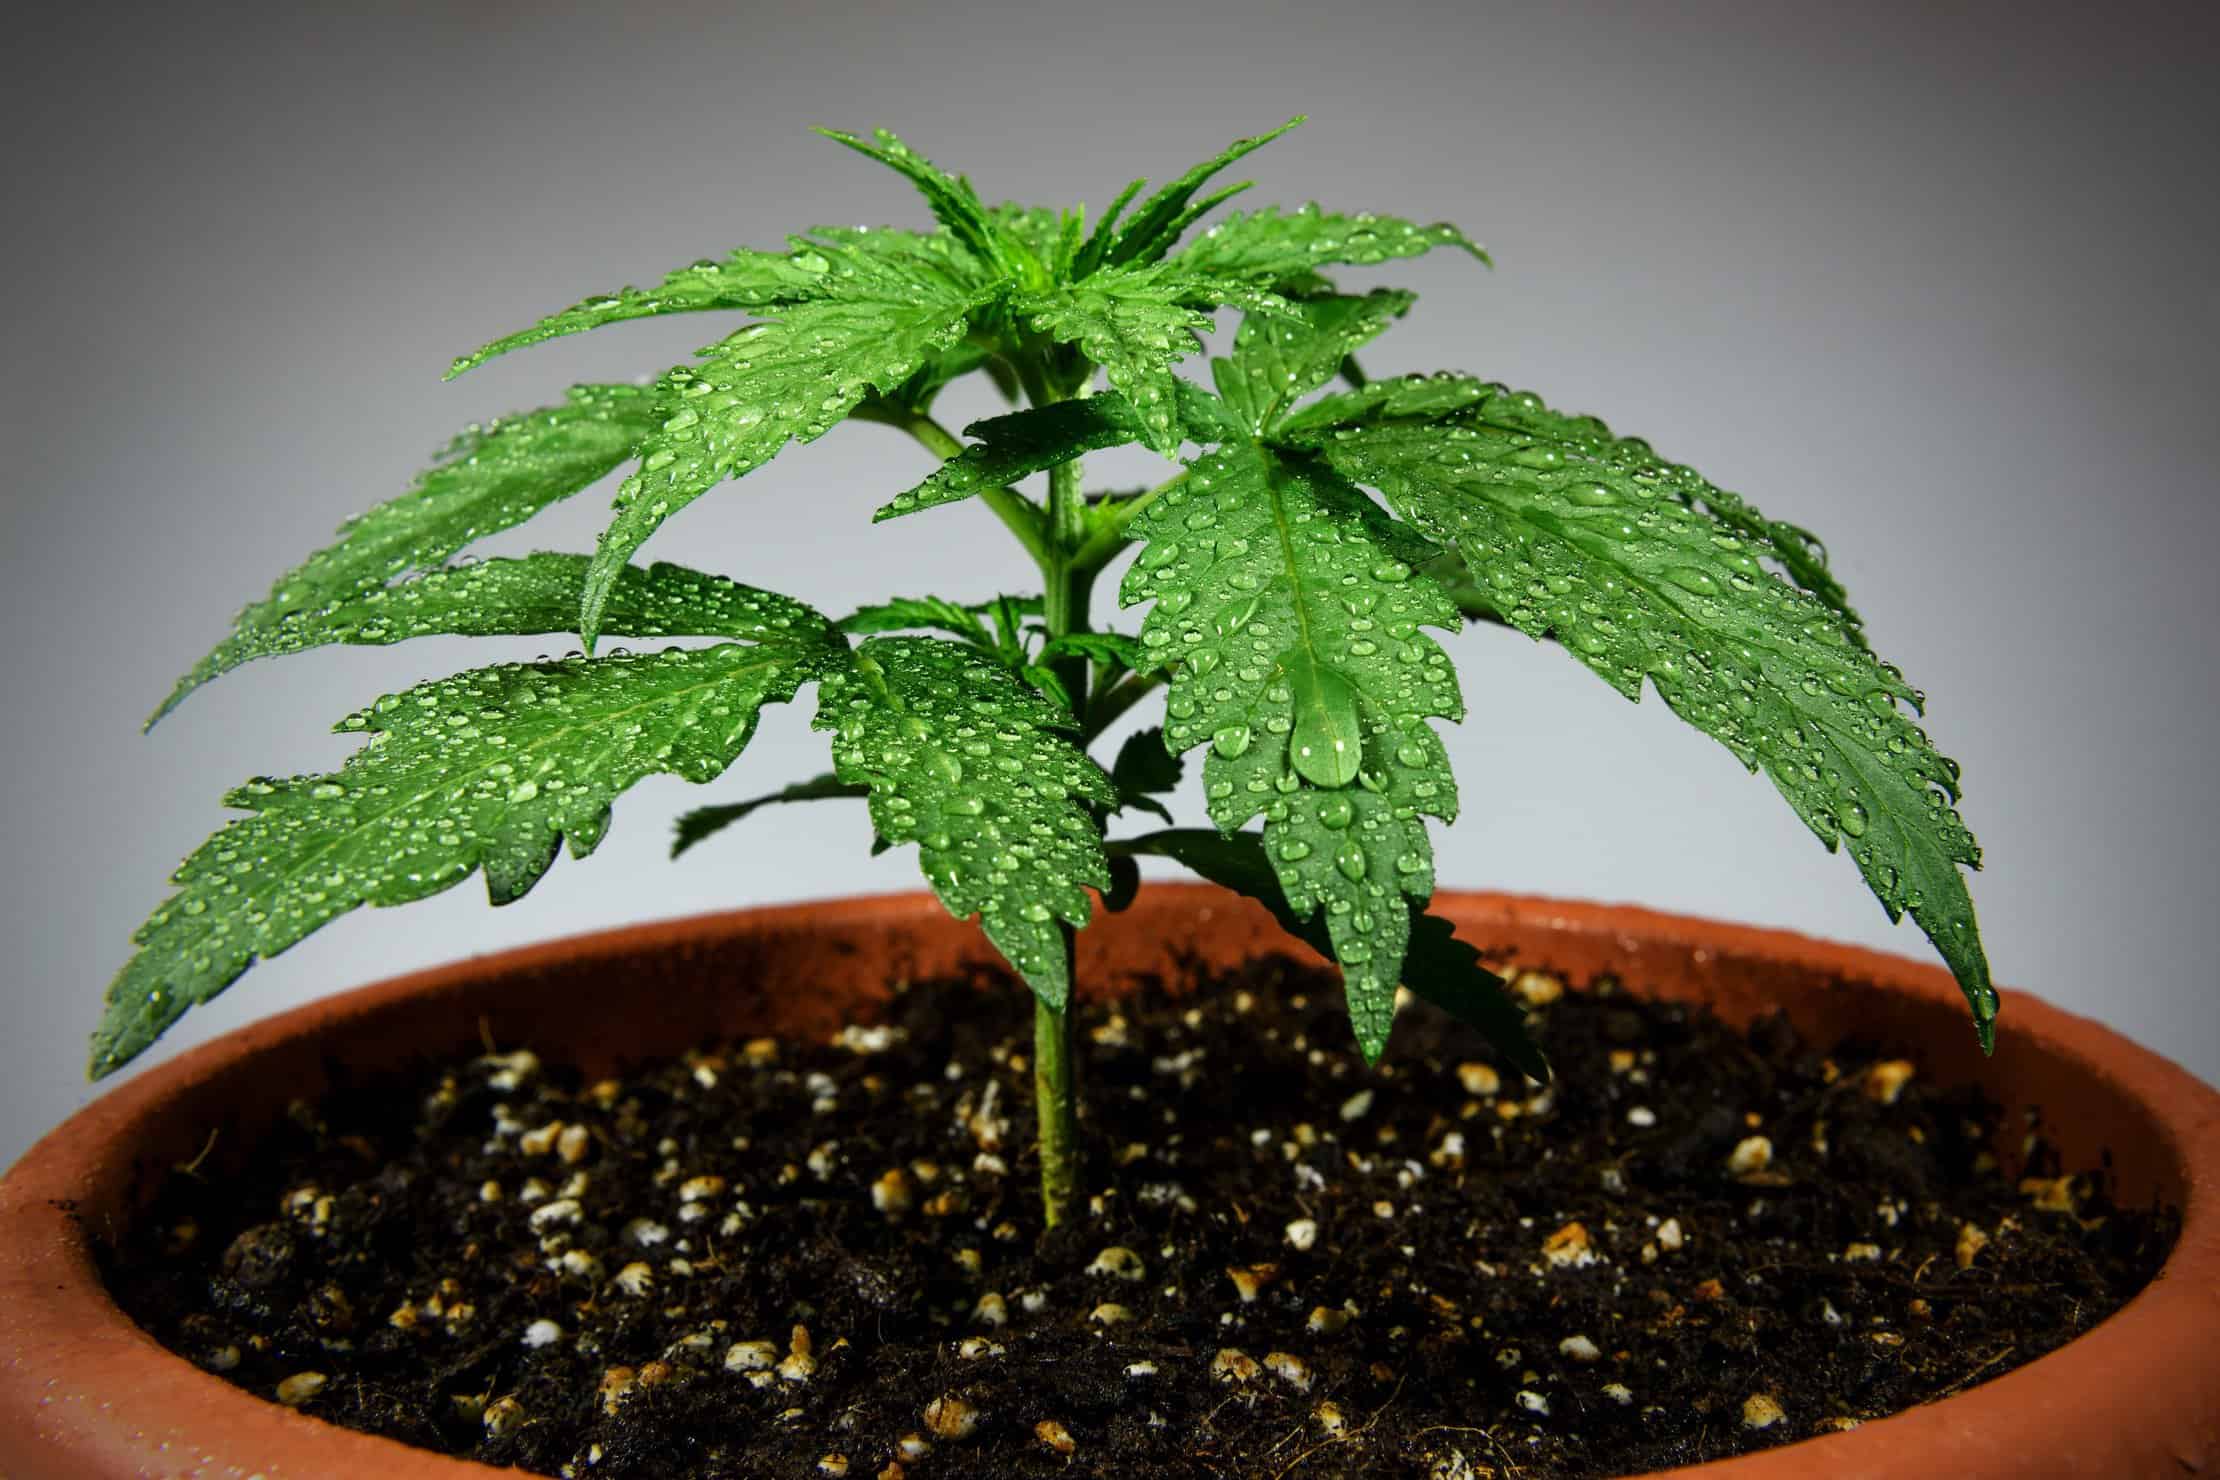 Overwatered Cannabis Plants: How to Spot and Avoid Overwatering Cannabis Plants